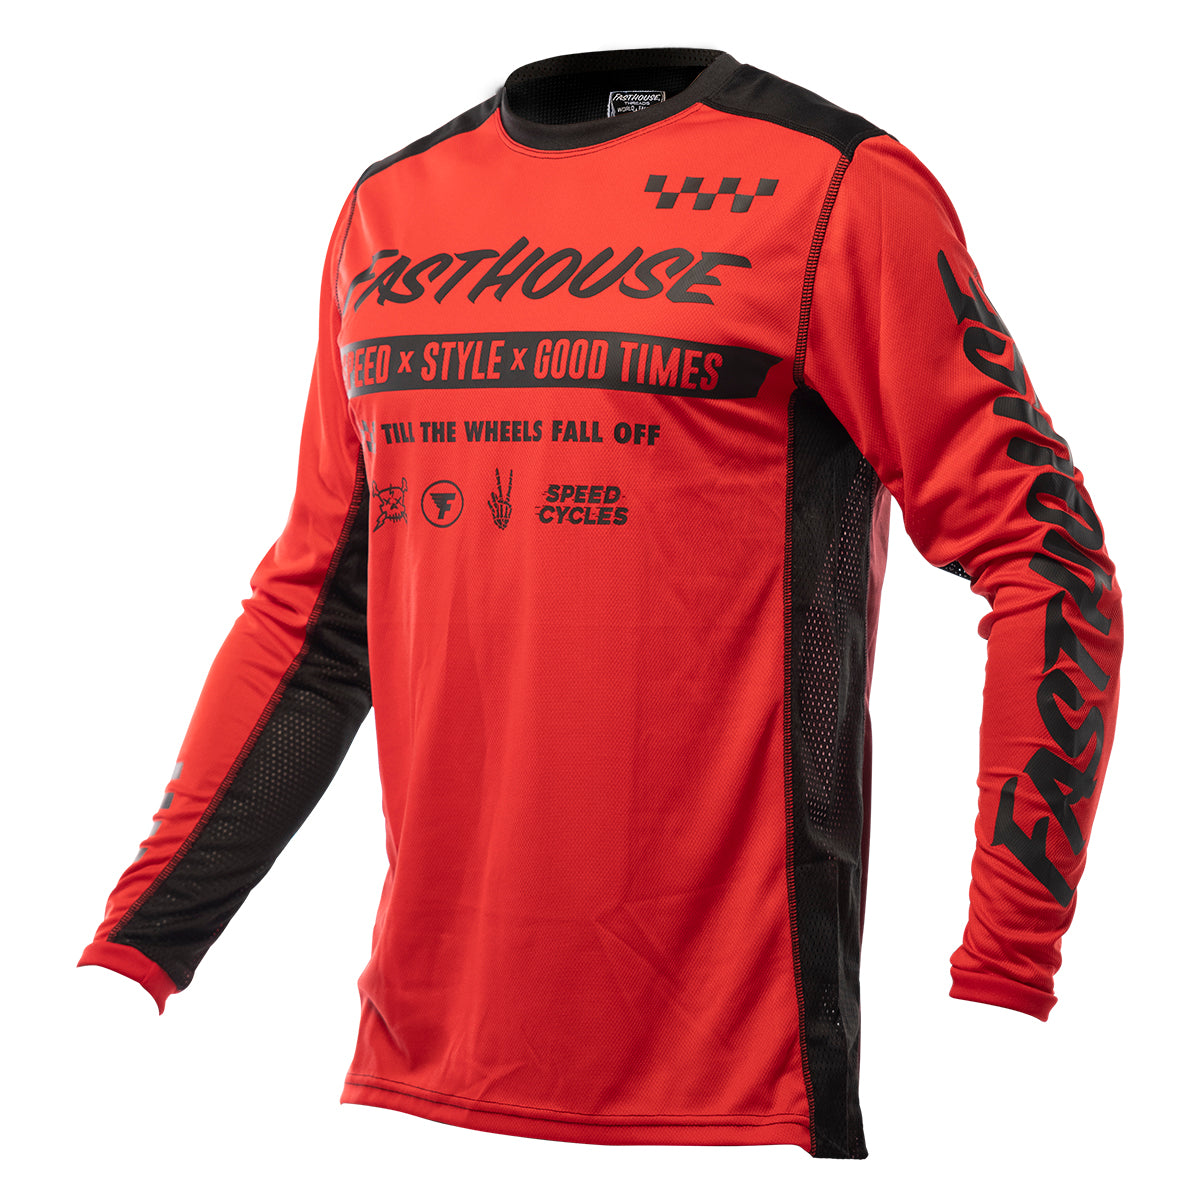 Grindhouse Domingo Jersey - Red